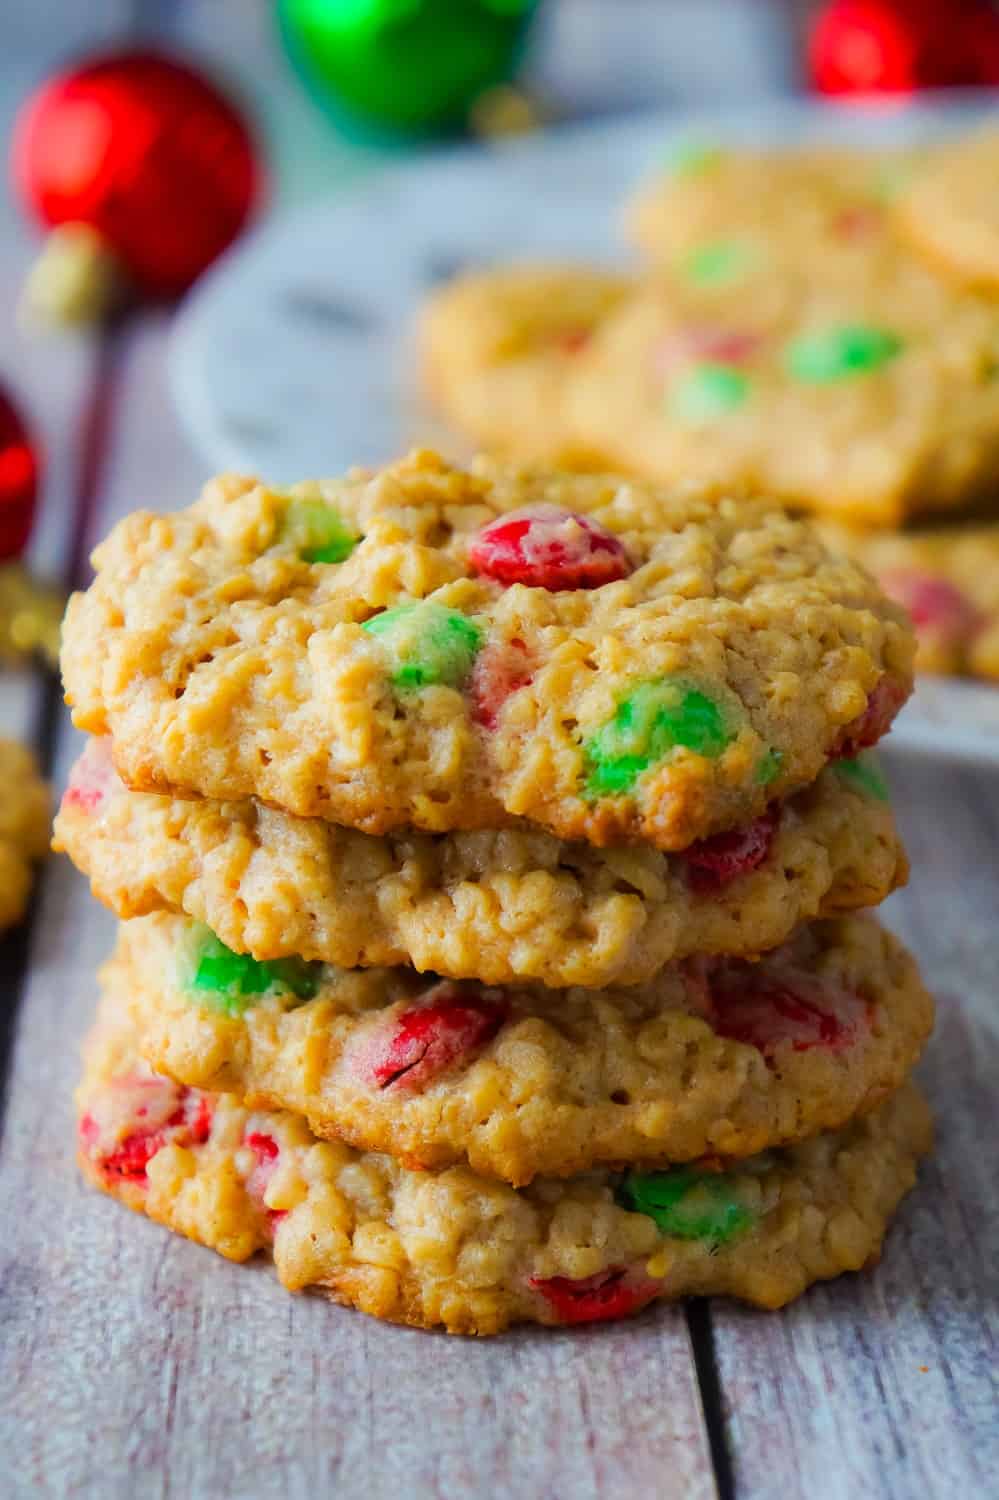 Christmas Monster Cookies are delicious oatmeal peanut butter cookies loaded with red and green M&Ms. These flourless oatmeal cookies would be the perfect addition to your Christmas baking.